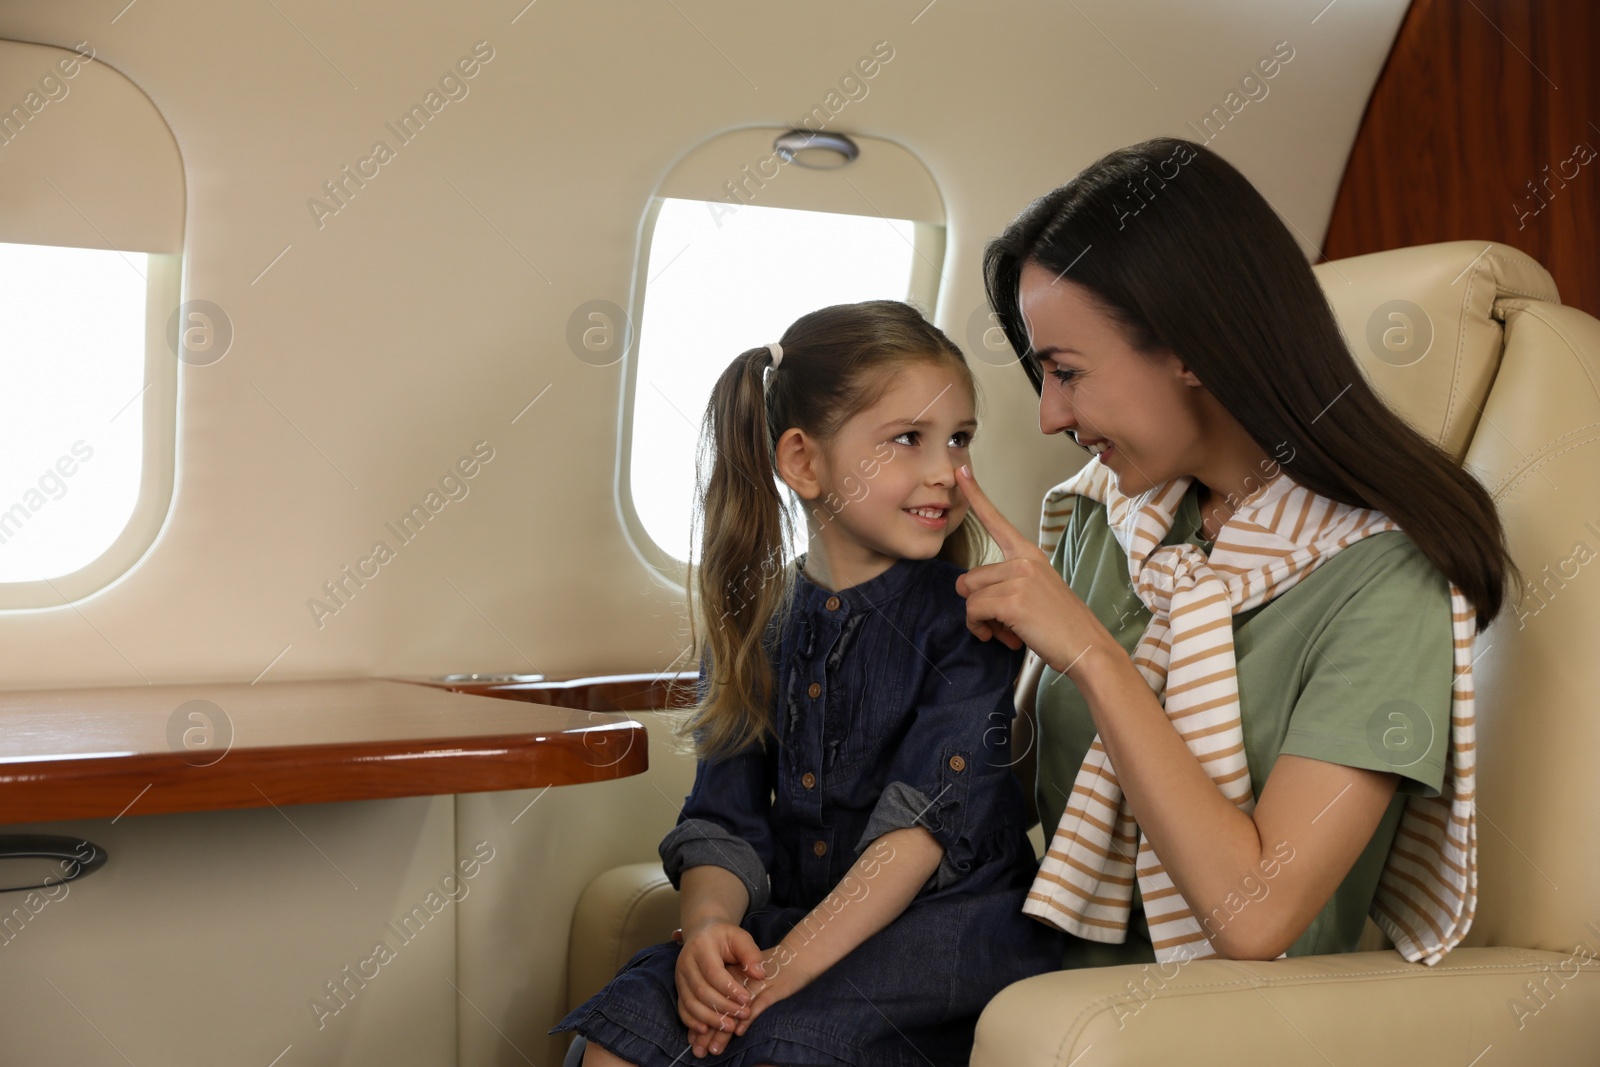 Photo of Mother and daughter in airplane during flight